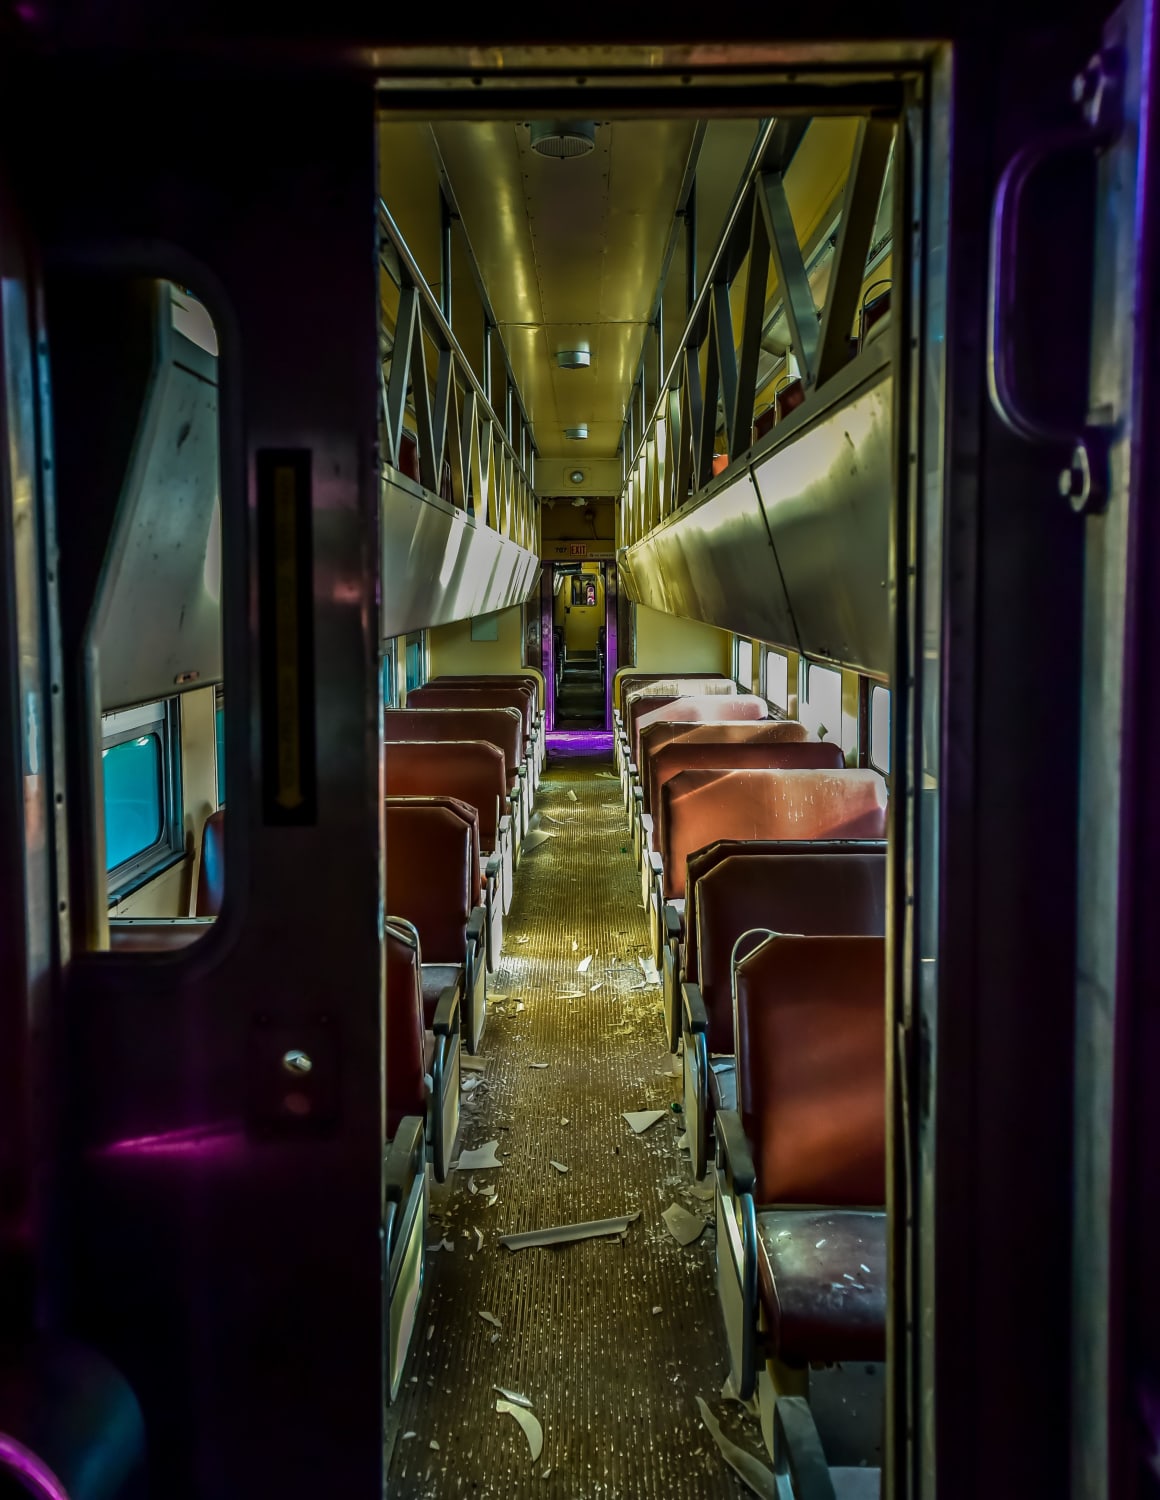 Inside an abandoned train car. The purple lighting was due to spray paint and paper over the windows.